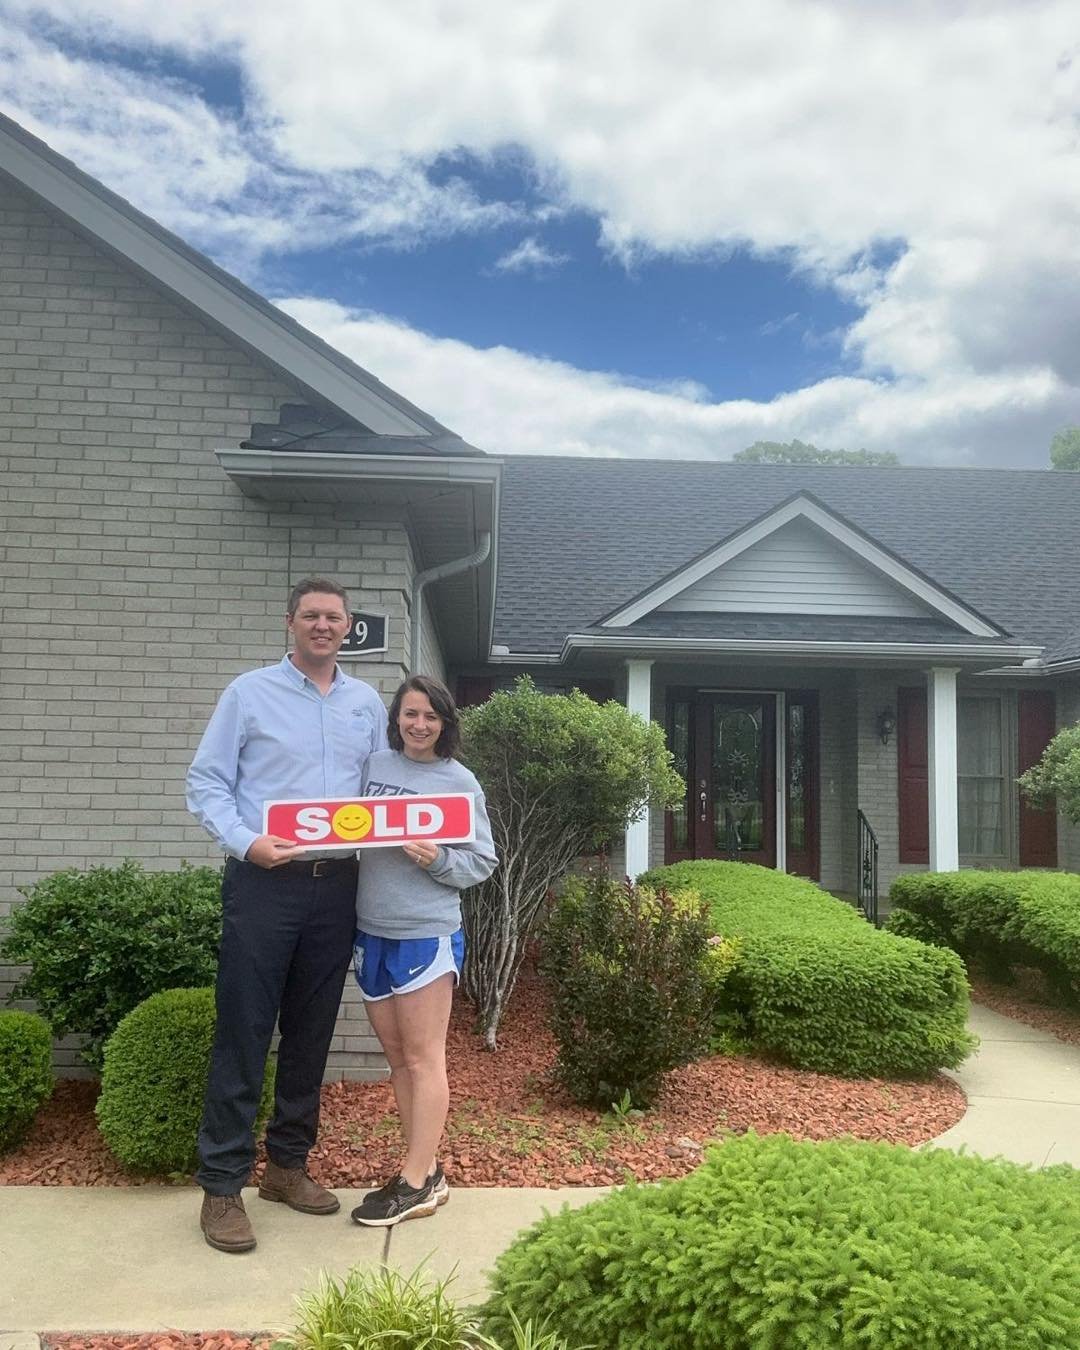 Area One Realty is sending out a GREAT BIG CONGRATULATIONS 🎊🎉🎈 to Tyler &amp; Kelli on the purchase of their beautiful new home 🏡 We wish your family many years of happiness in your new home!  We very much enjoyed working with you &amp; appreciat